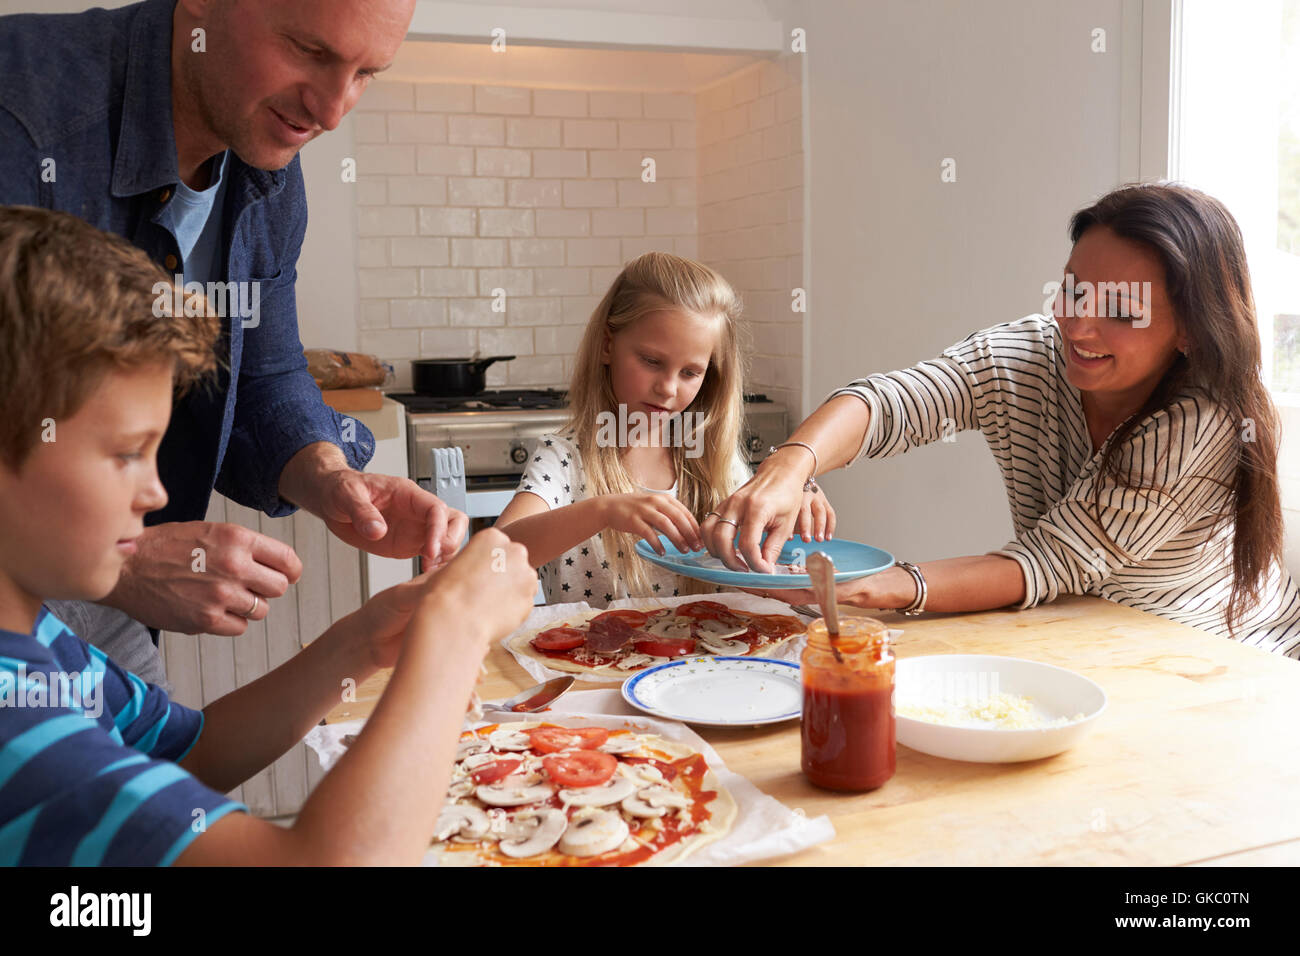 Family At Home In Kitchen Making Pizzas Together Stock Photo